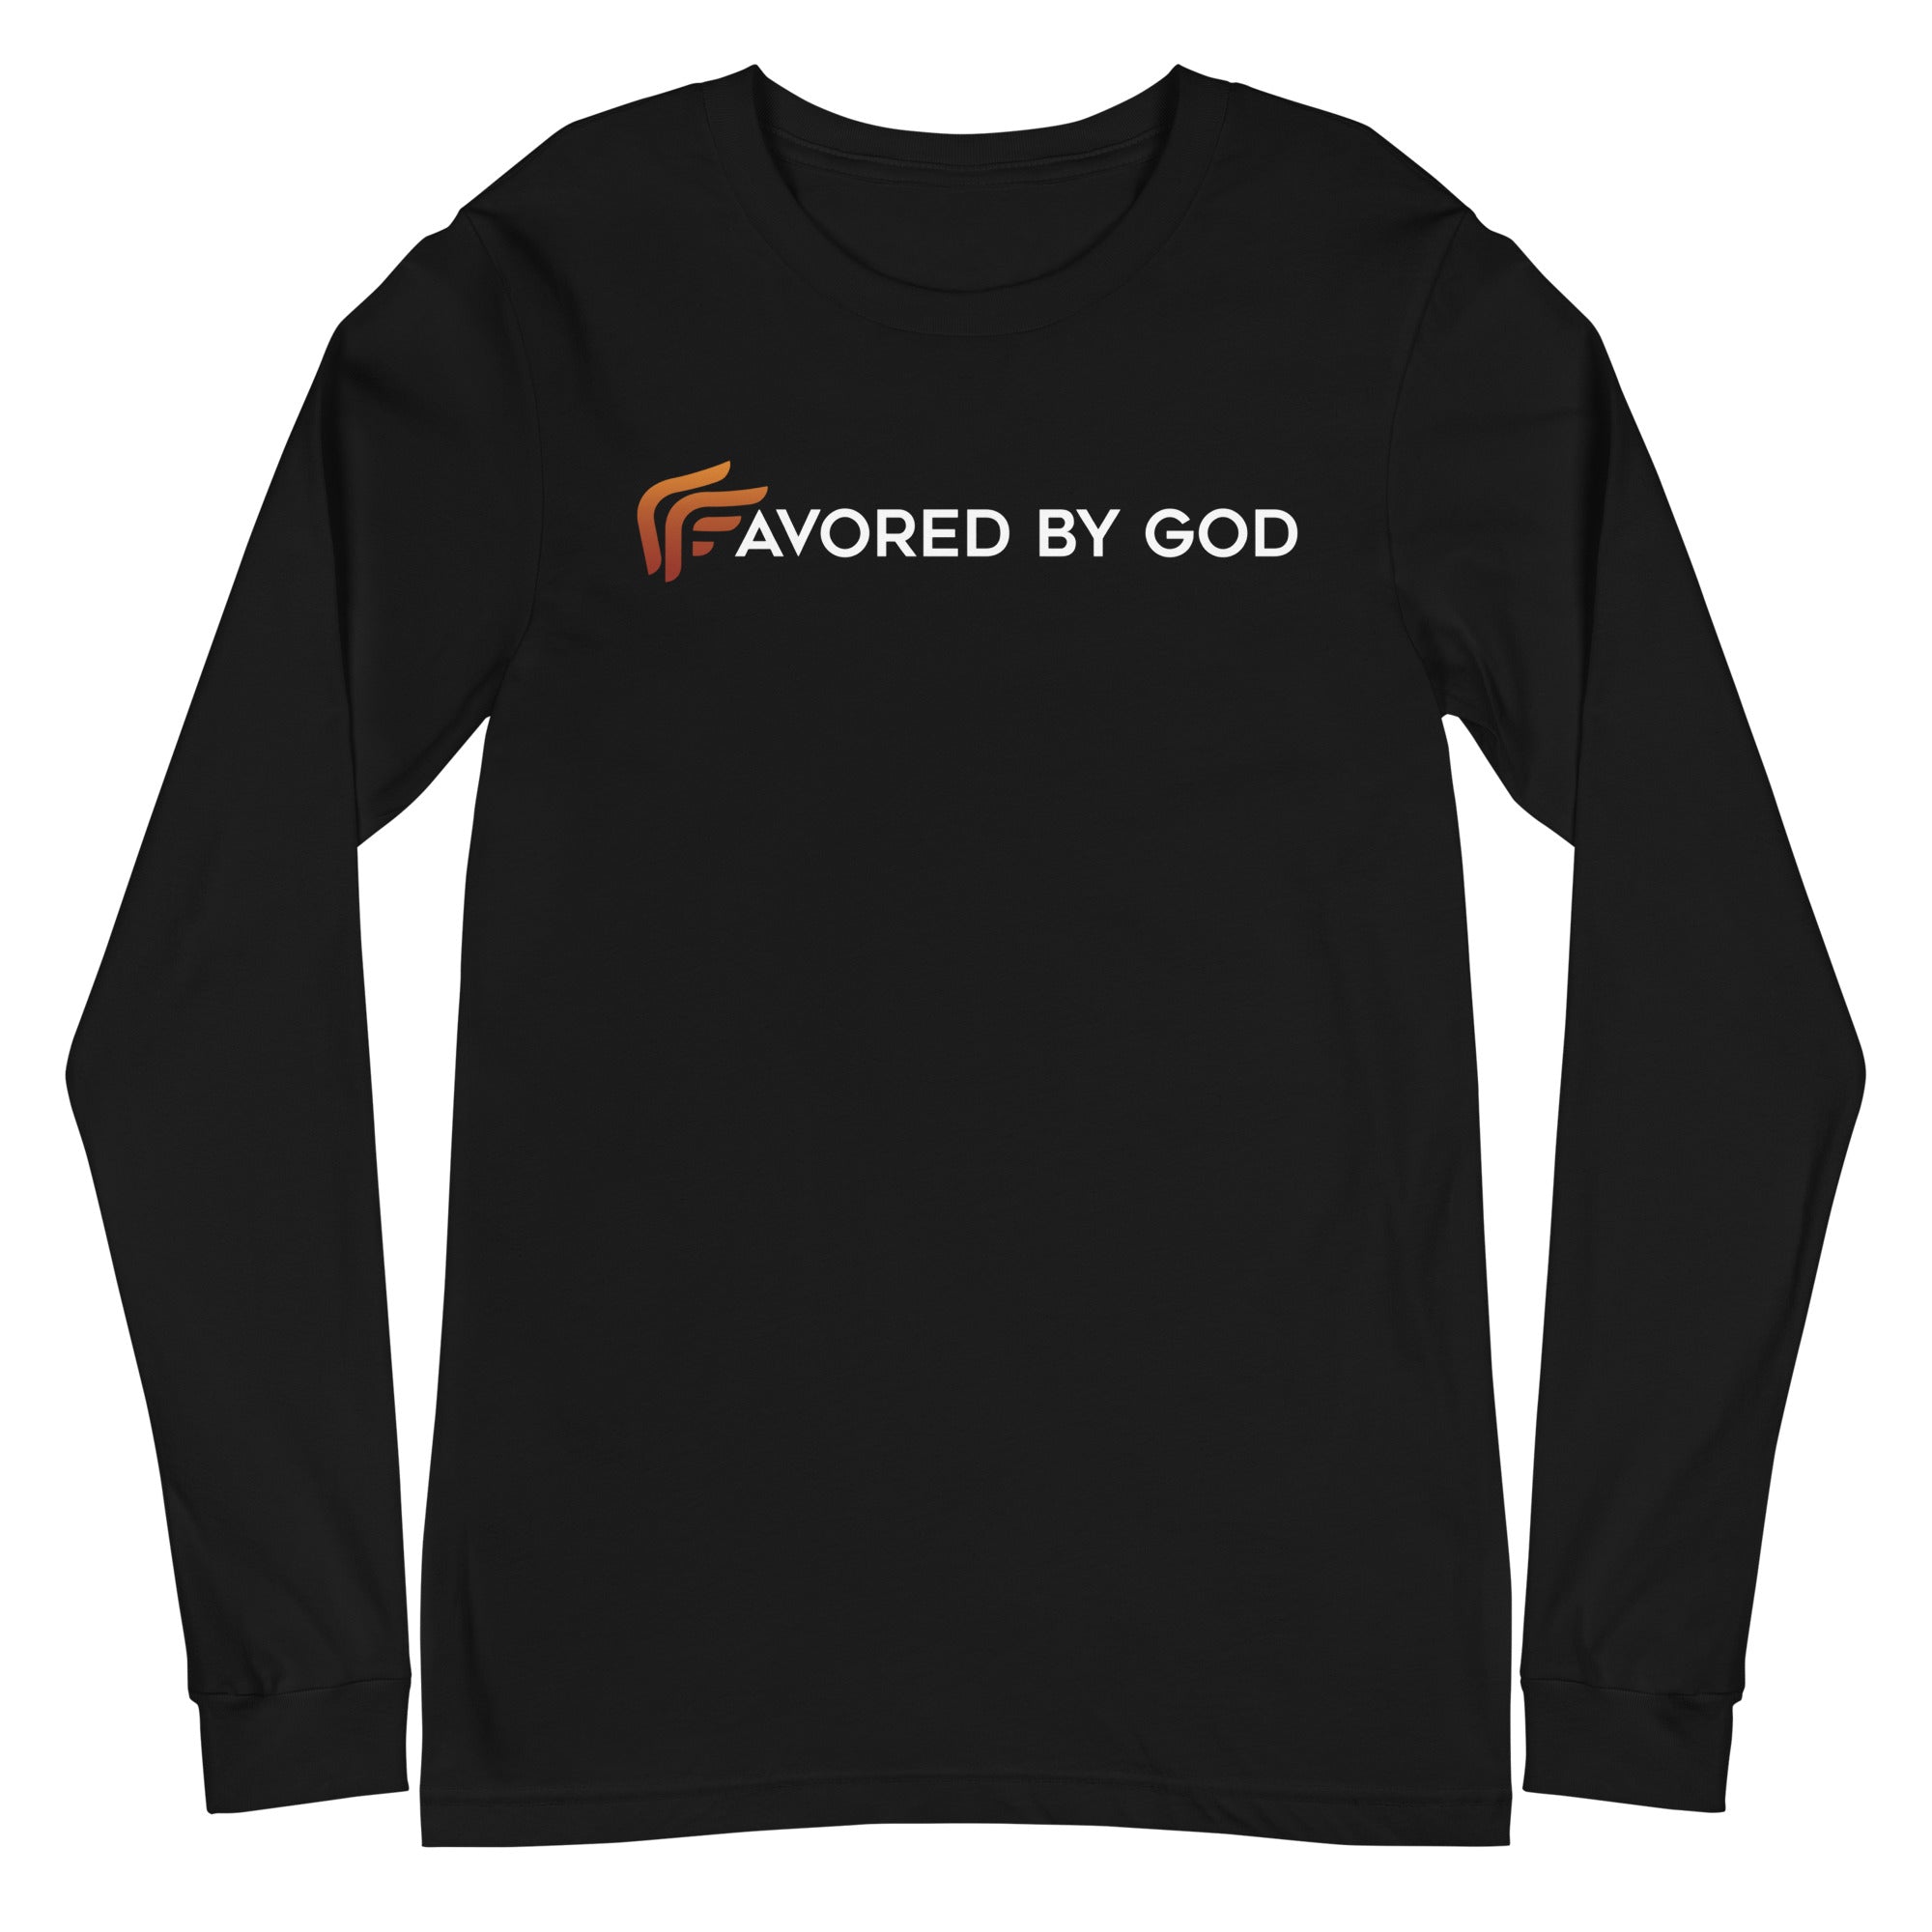 Signature Favored By God, Used By God, Used By God Clothing, Christian Apparel, Christian T-Shirts, Christian Shirts, christian t shirts for women, Men's Christian T-Shirt, Christian Clothing, God Shirts, christian clothing t shirts, Christian Sweatshirts, womens christian t shirts,t-shirts about jesus, God Clothing, Jesus Hoodie, Jesus Clothes, God Is Dope, Art Of Homage, Red Letter Clothing, Elevated Faith, Beacon Threads, God The Father Apparel